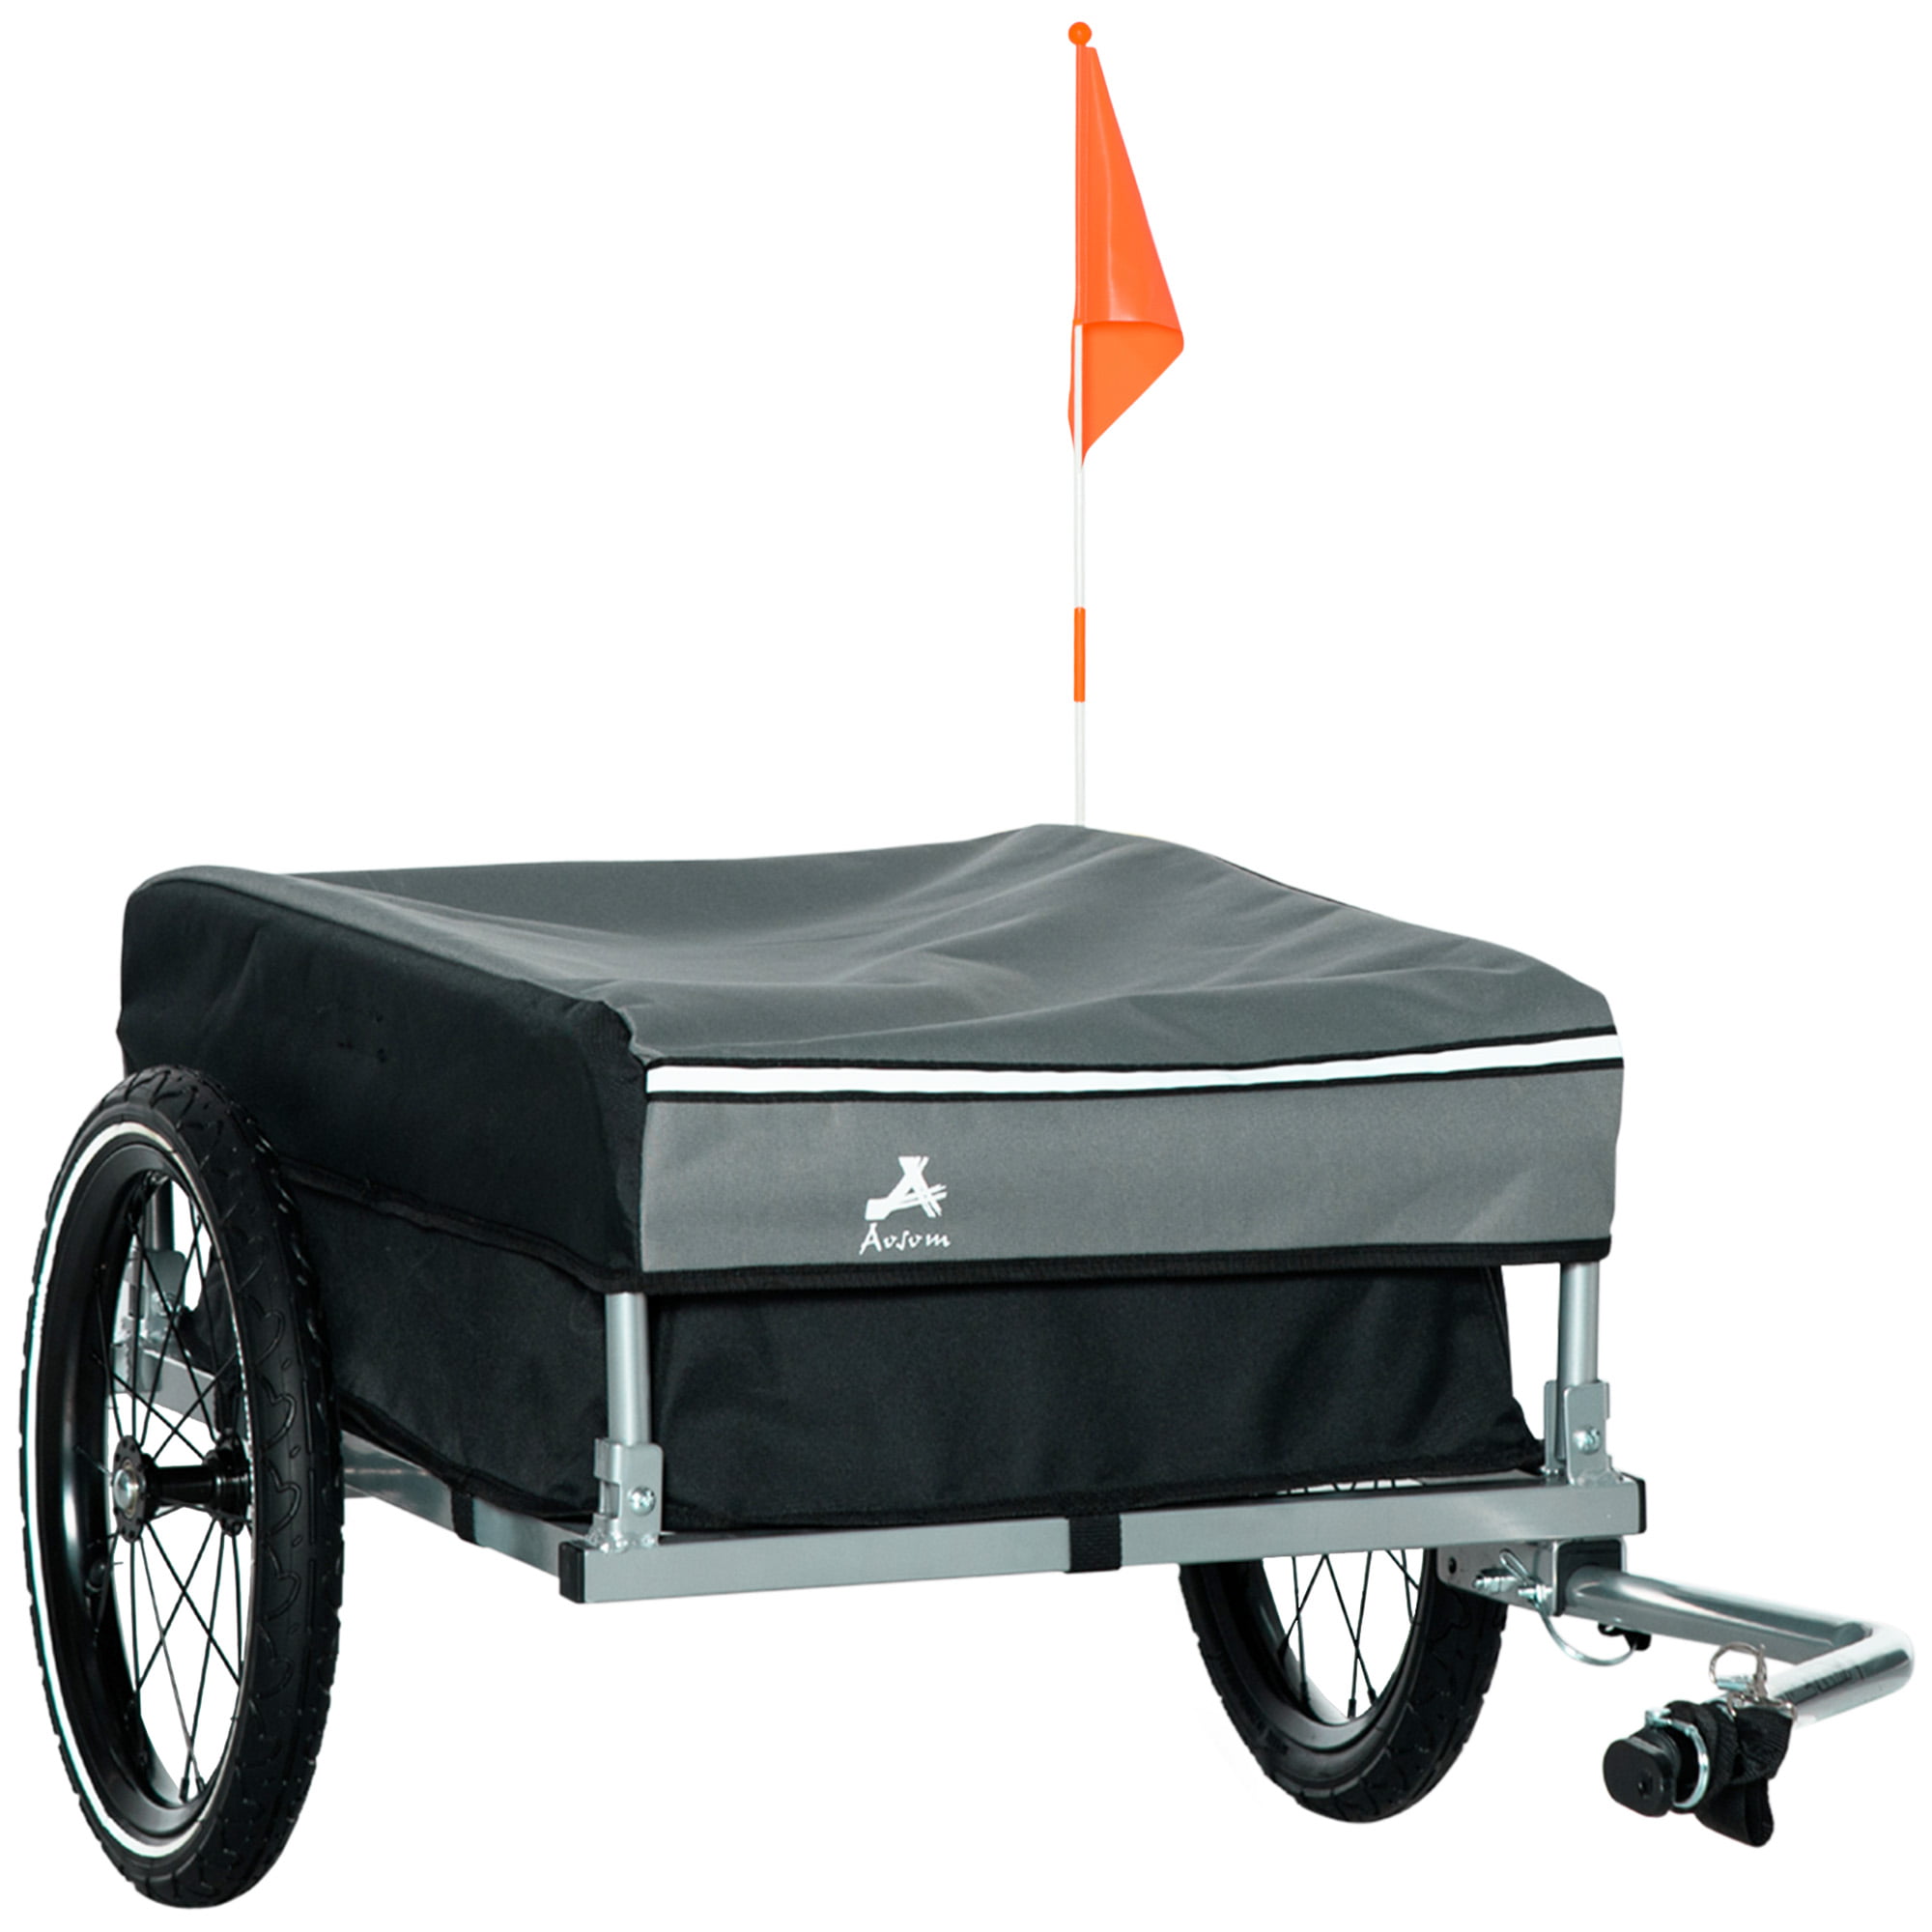 Estink Bike Trailer 70L Bike Bicycle Cargo Trolley Cart Handle Carrier with Cover 